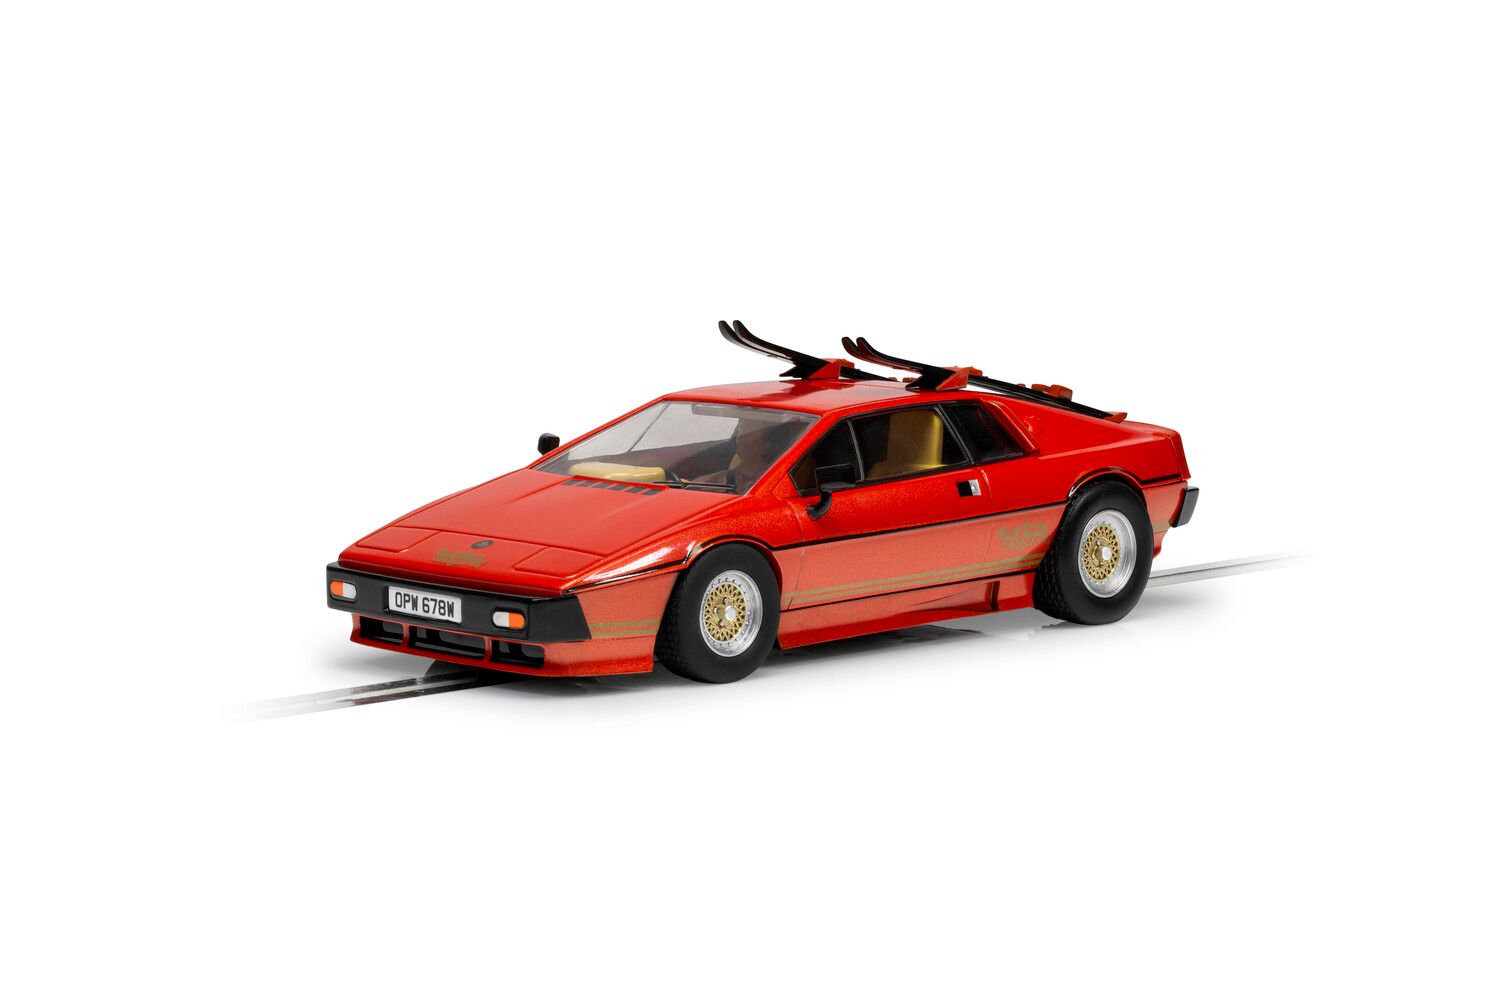 James Bond Lotus Esprit Turbo - "For Your Eyes Only " - C4301